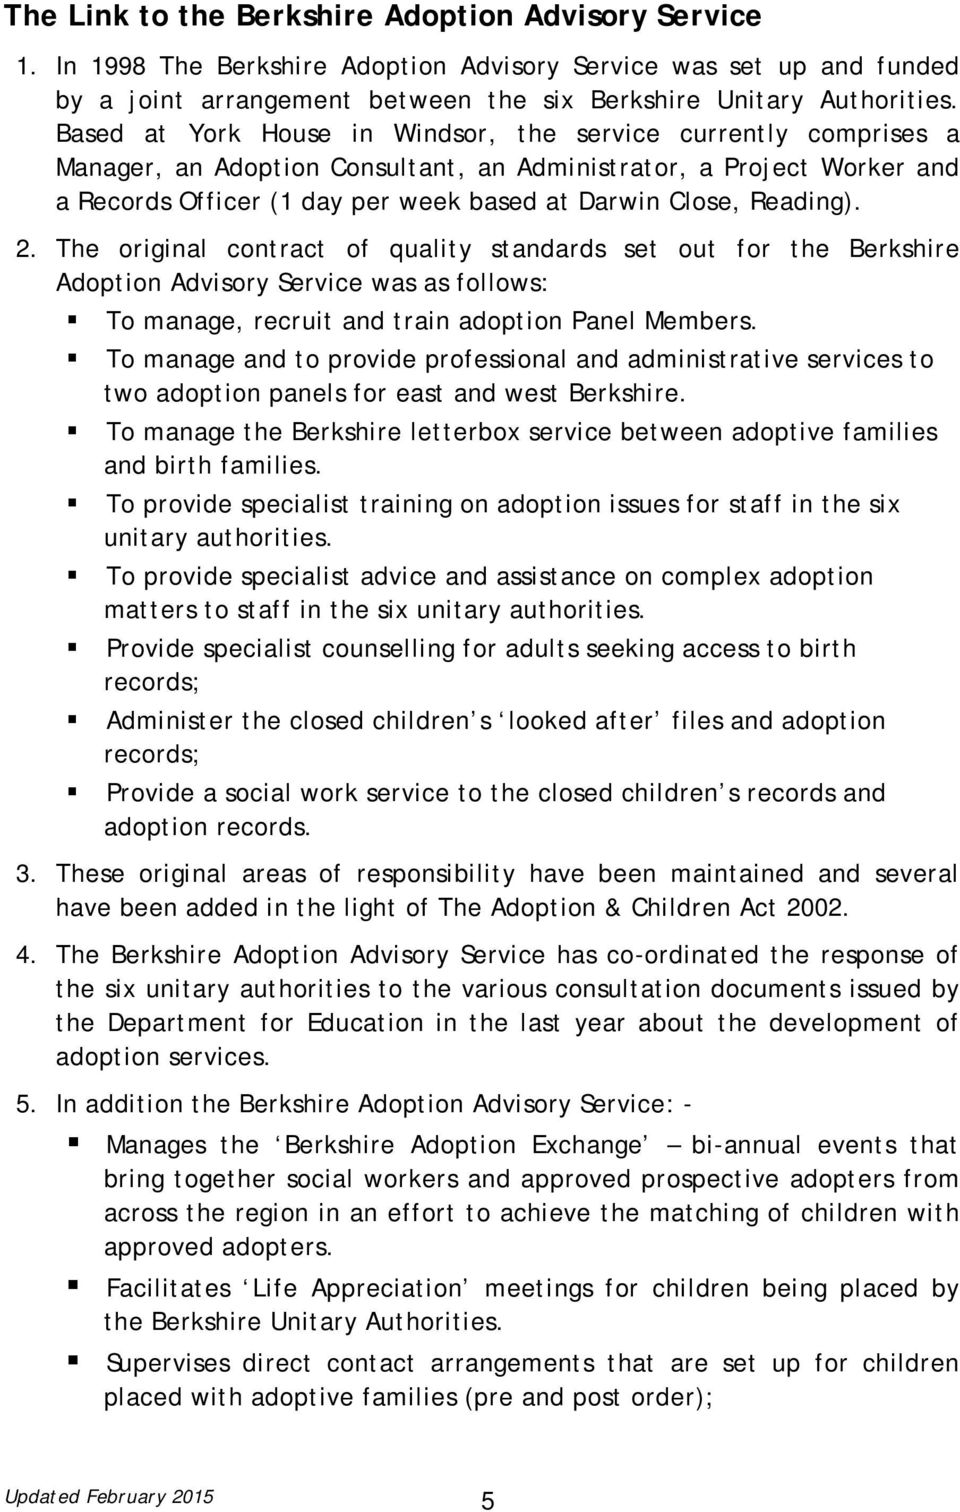 Reading). 2. The original contract of quality standards set out for the Berkshire Adoption Advisory Service was as follows: To manage, recruit and train adoption Panel Members.